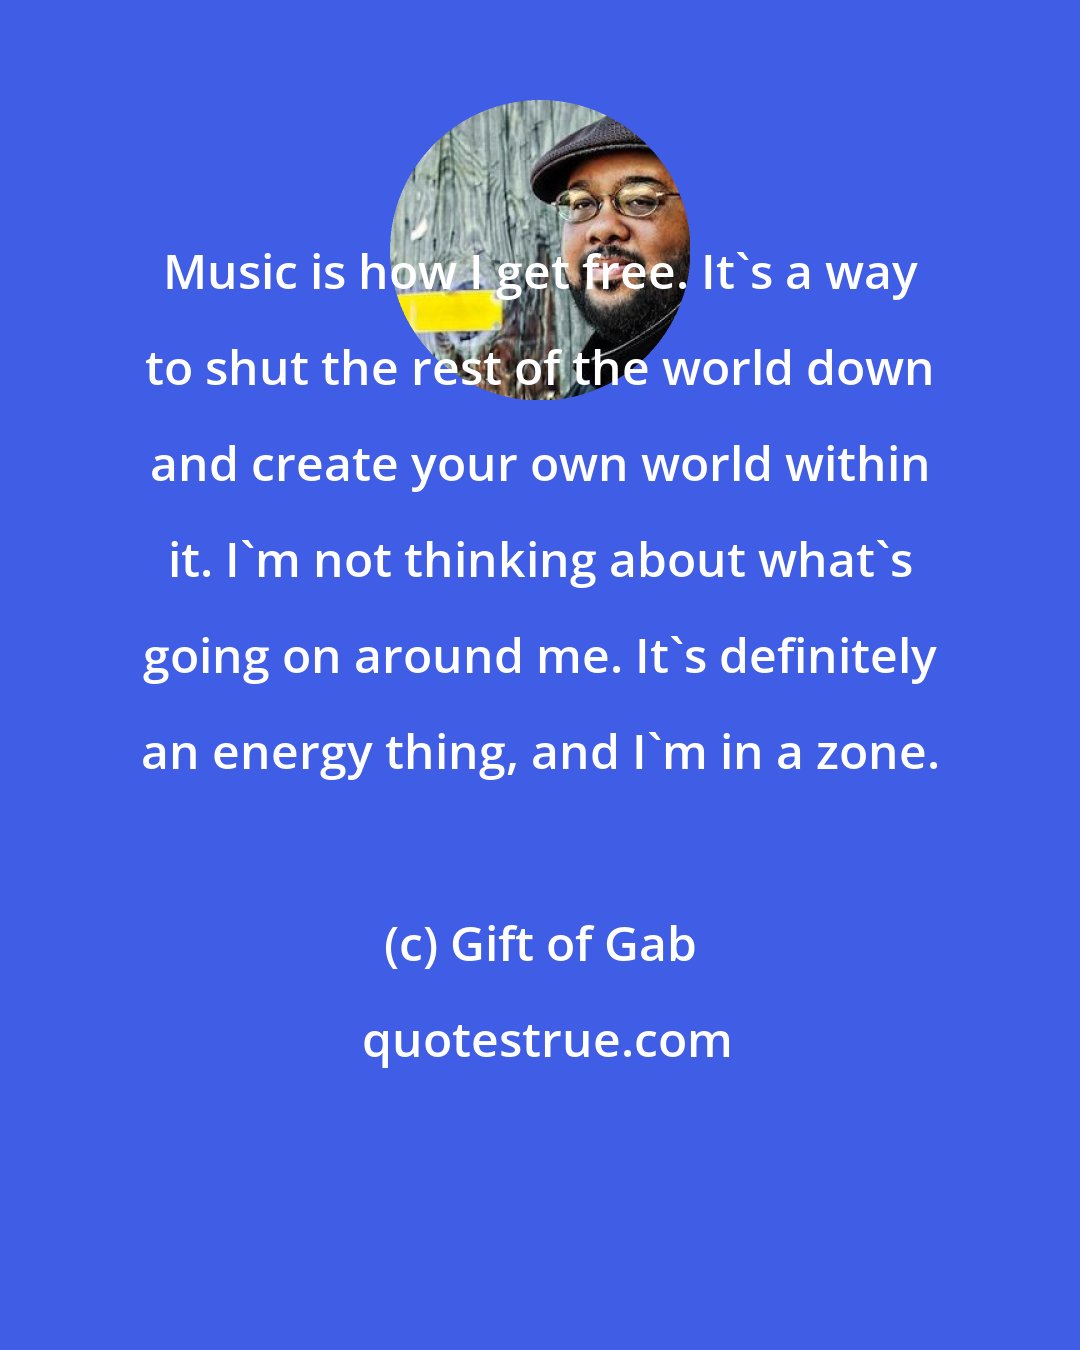 Gift of Gab: Music is how I get free. It's a way to shut the rest of the world down and create your own world within it. I'm not thinking about what's going on around me. It's definitely an energy thing, and I'm in a zone.